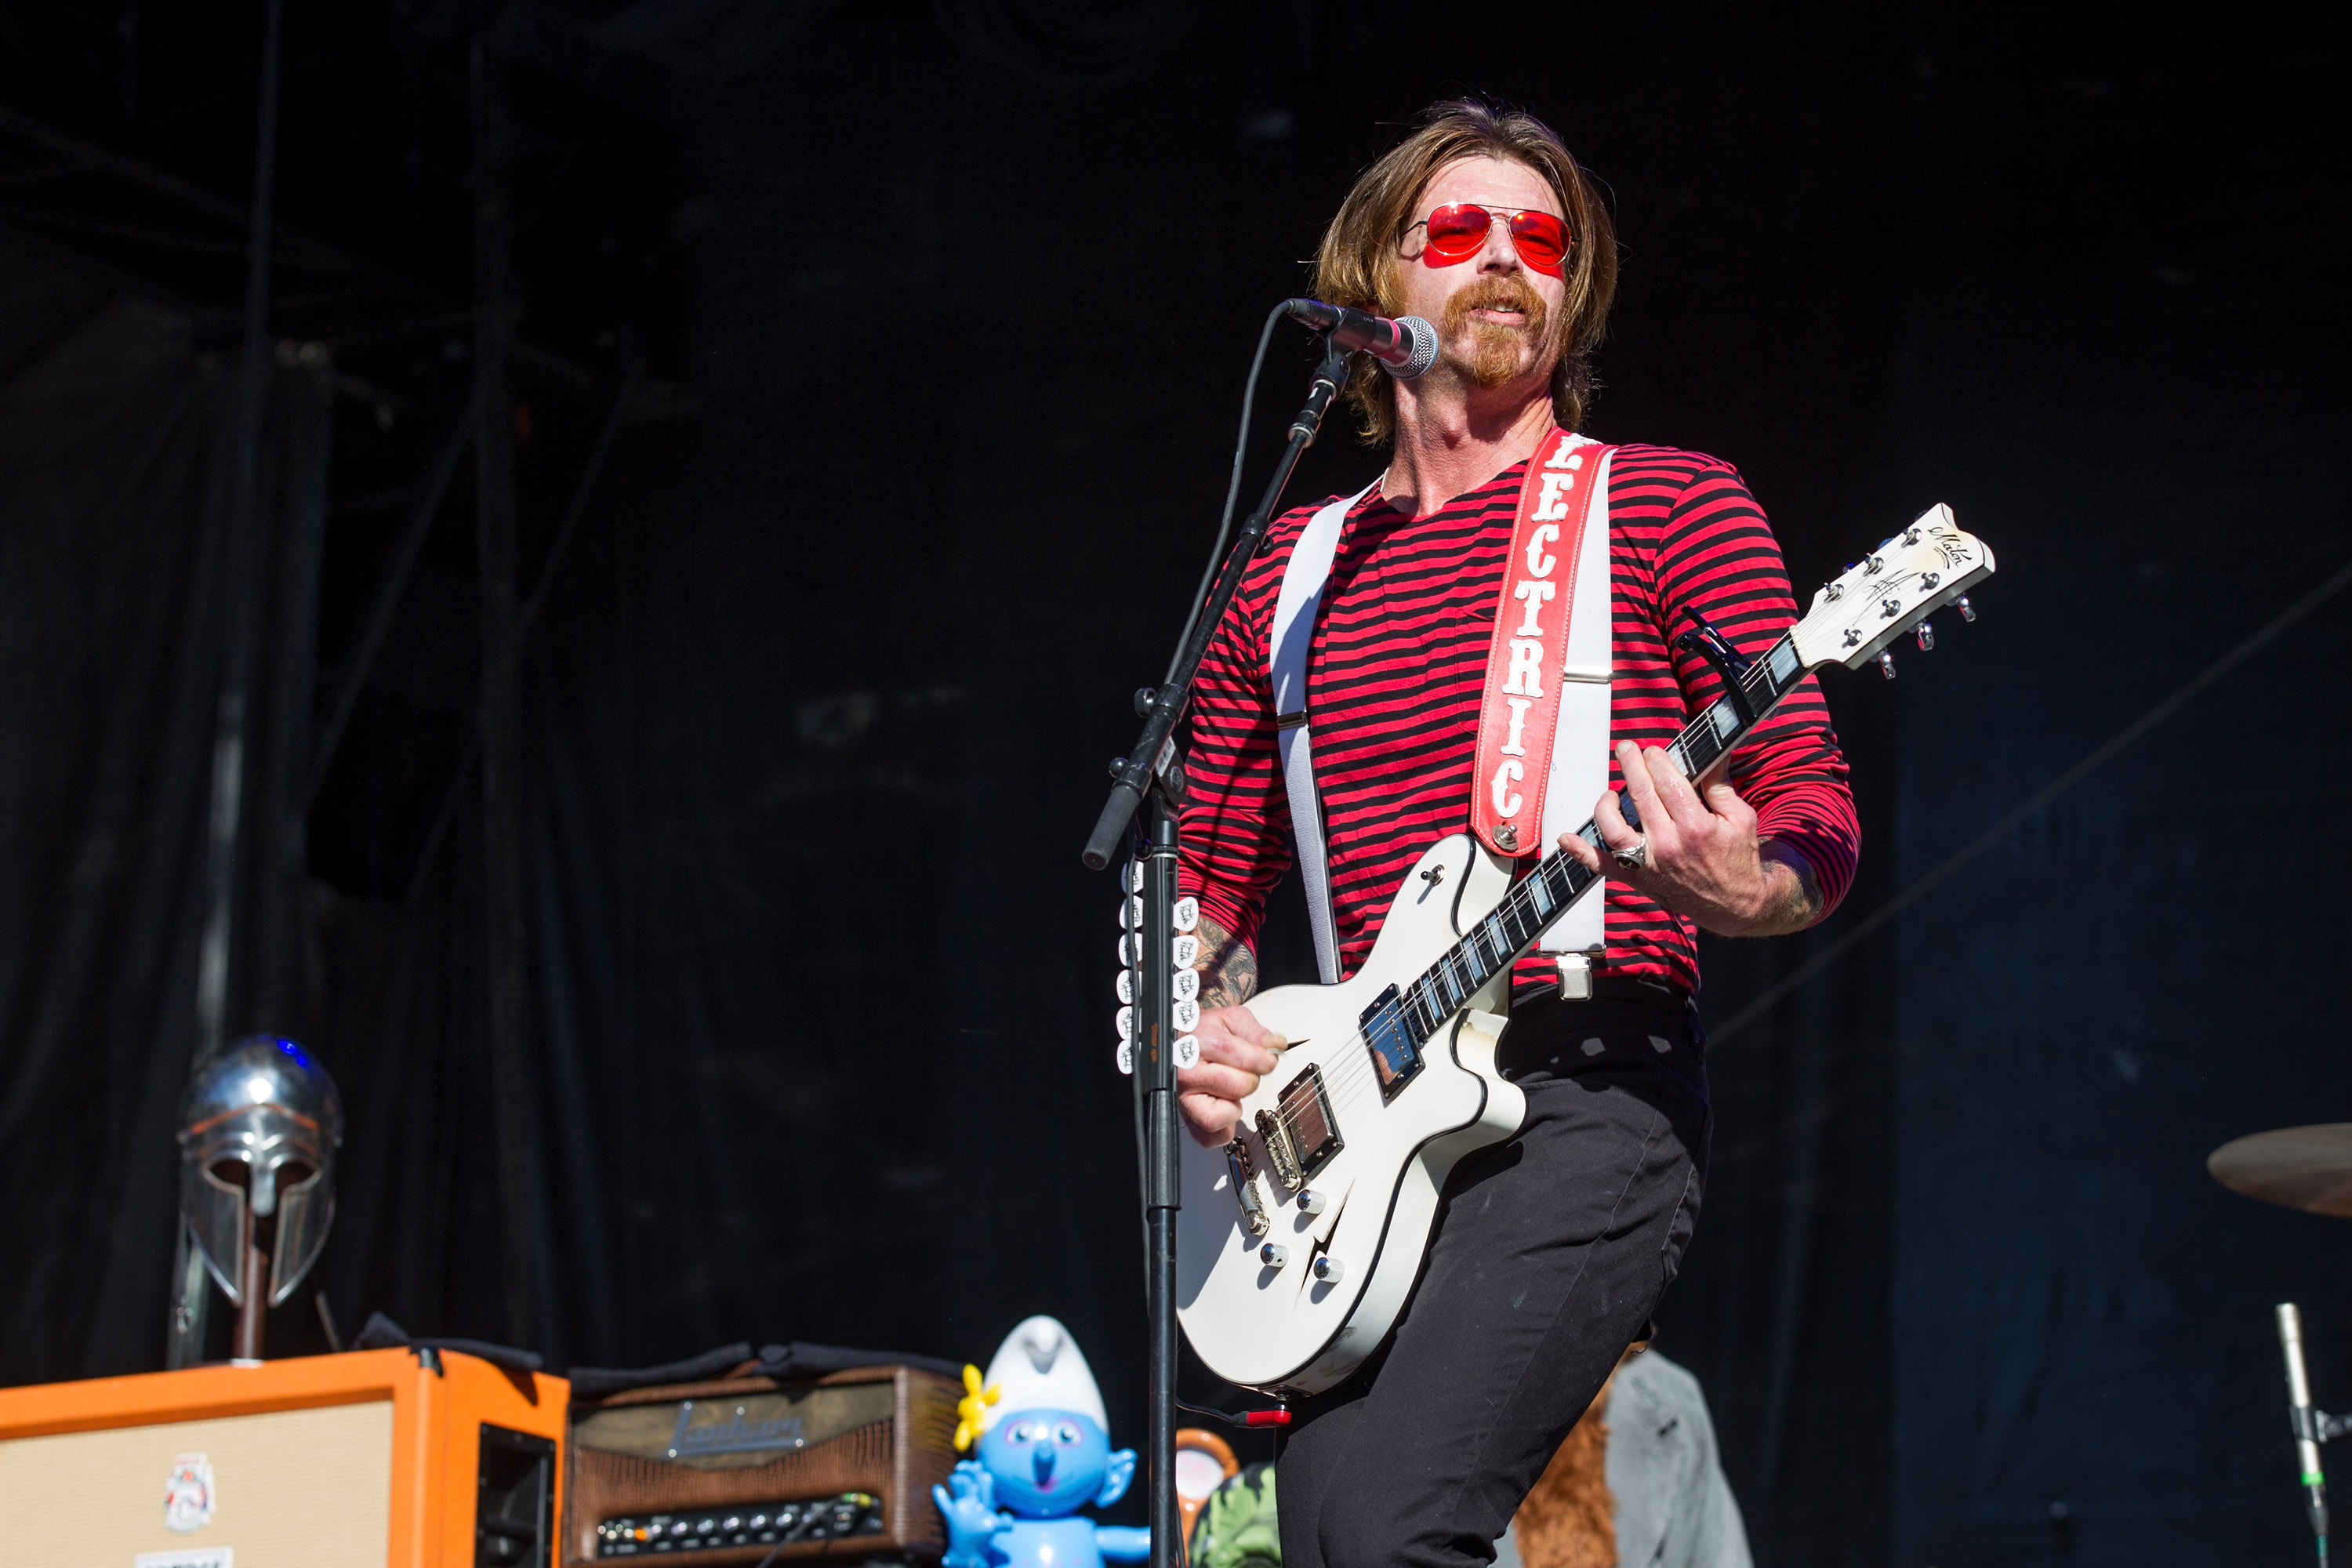 Eagles Of Death Metal Frontman Calls Teens Marching For Gun Control “Pathetic”